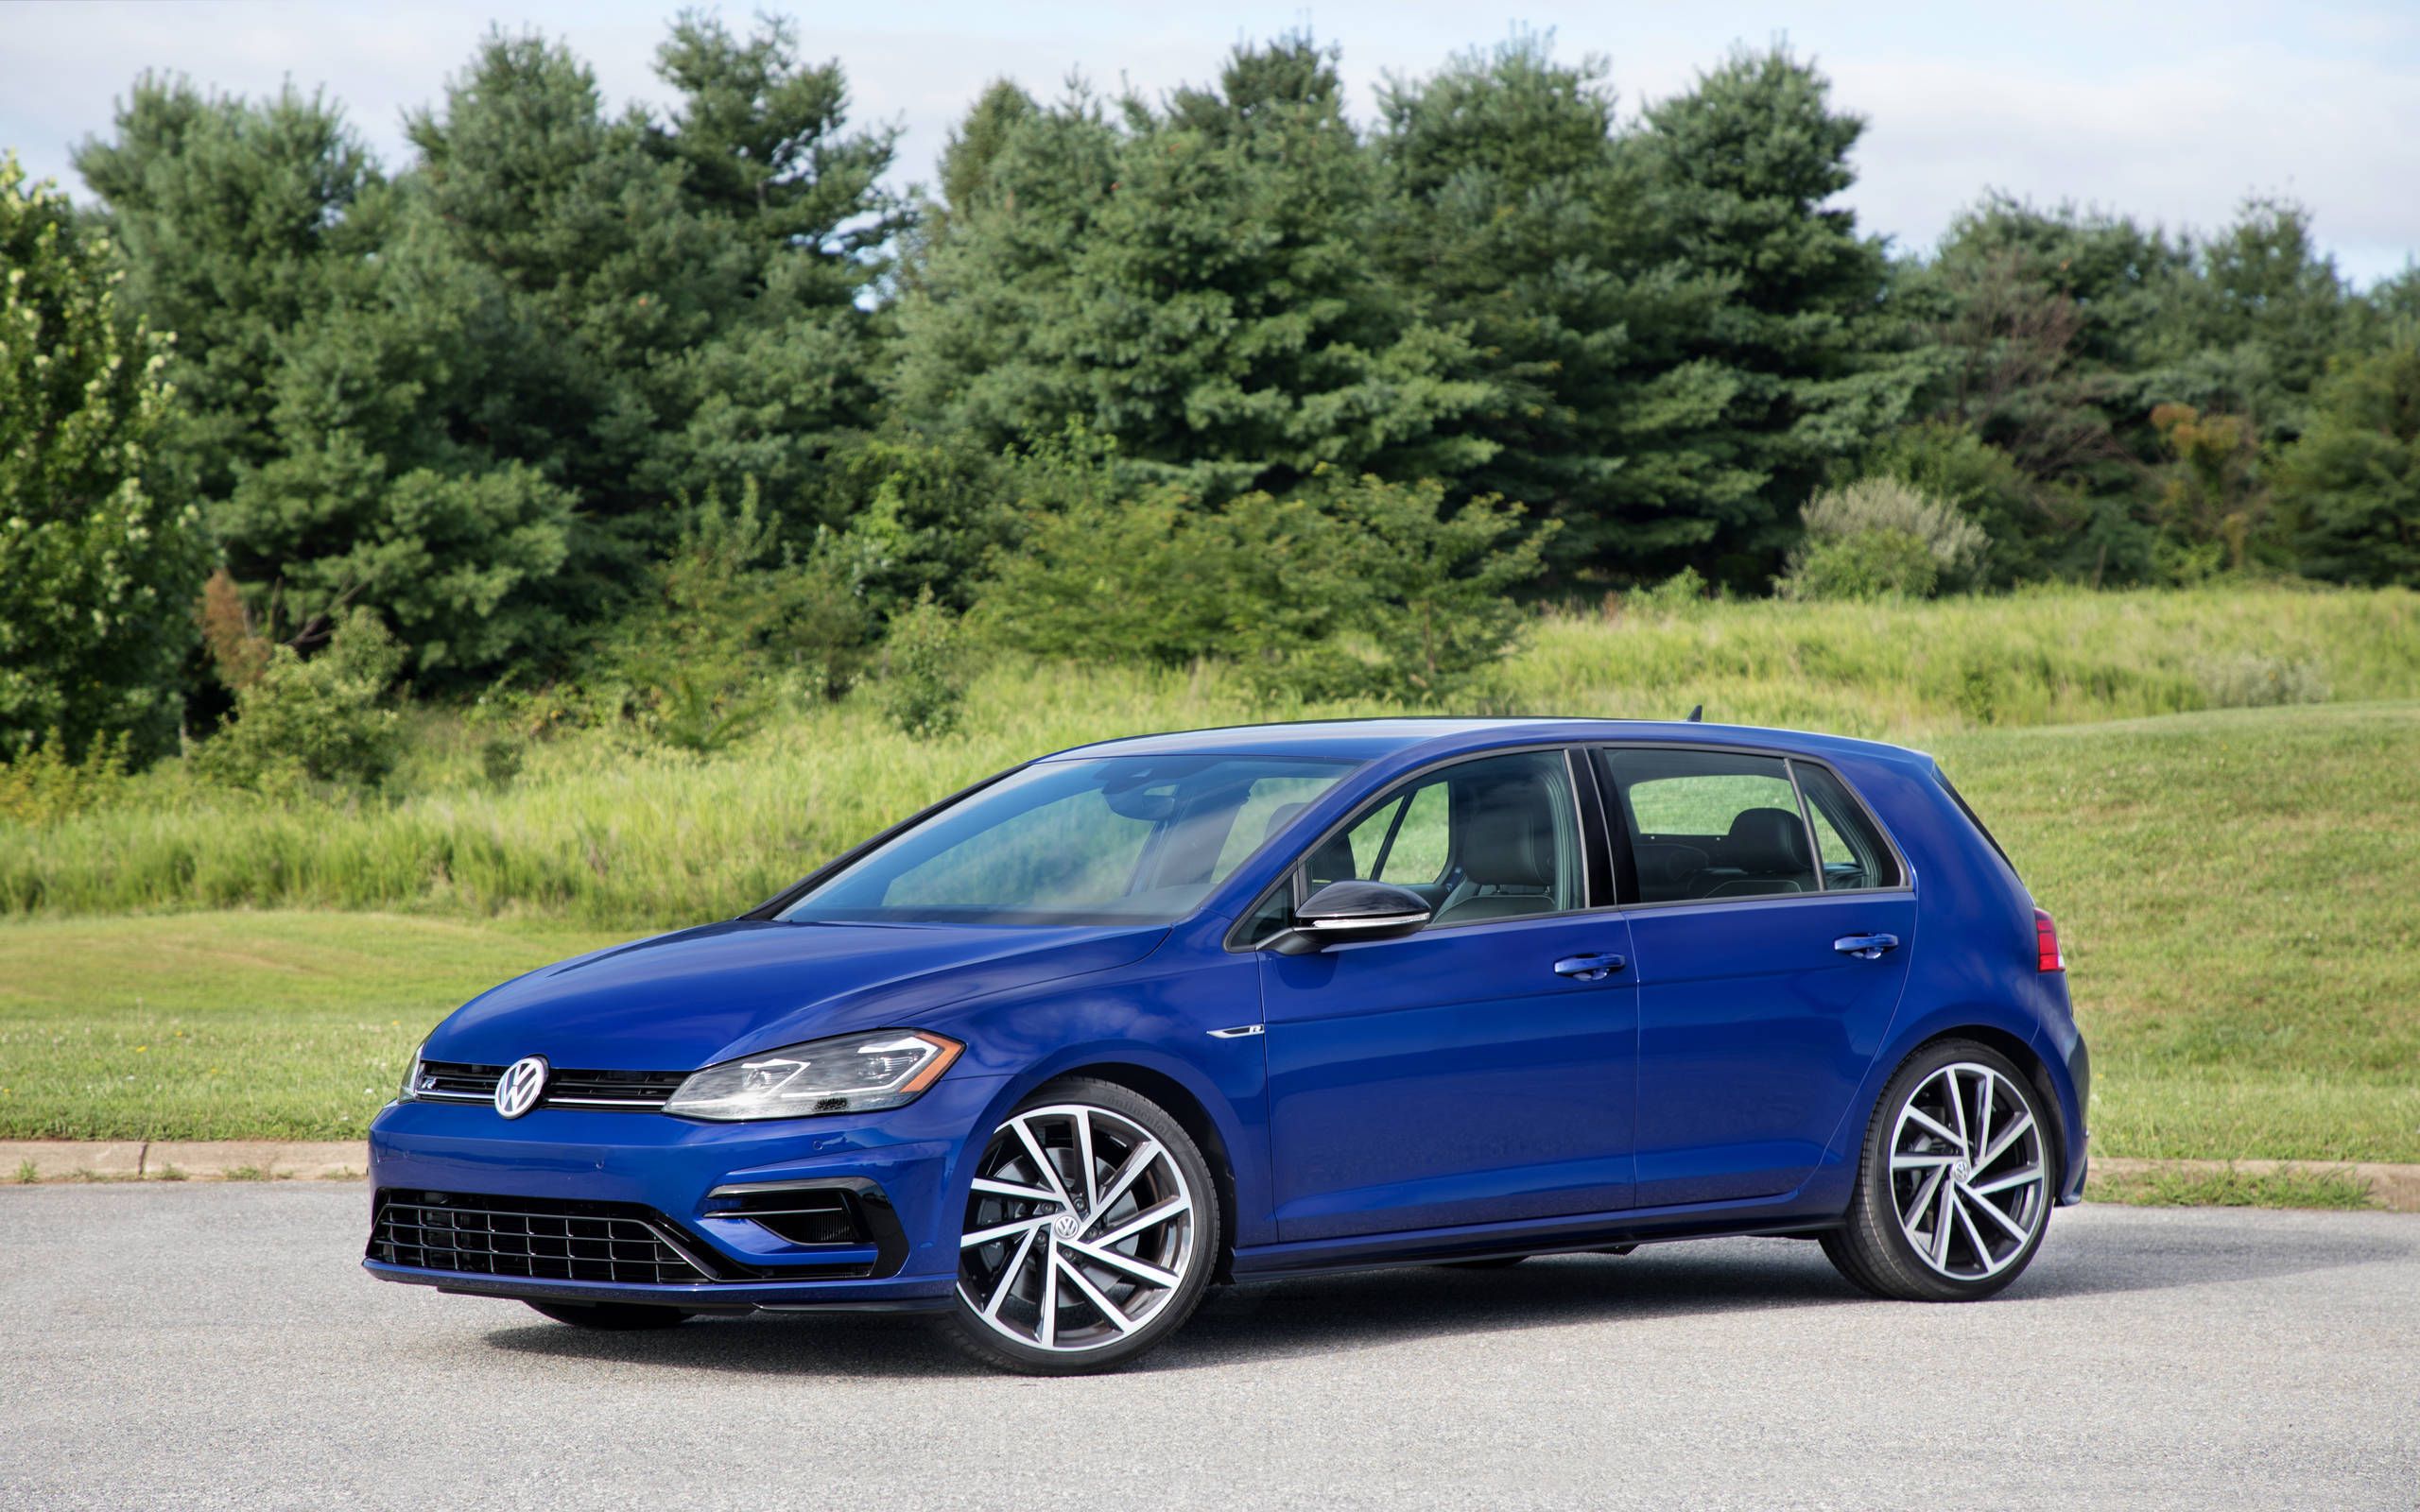 2018 Volkswagen Golf GTI and R first drive: Hustle and flow